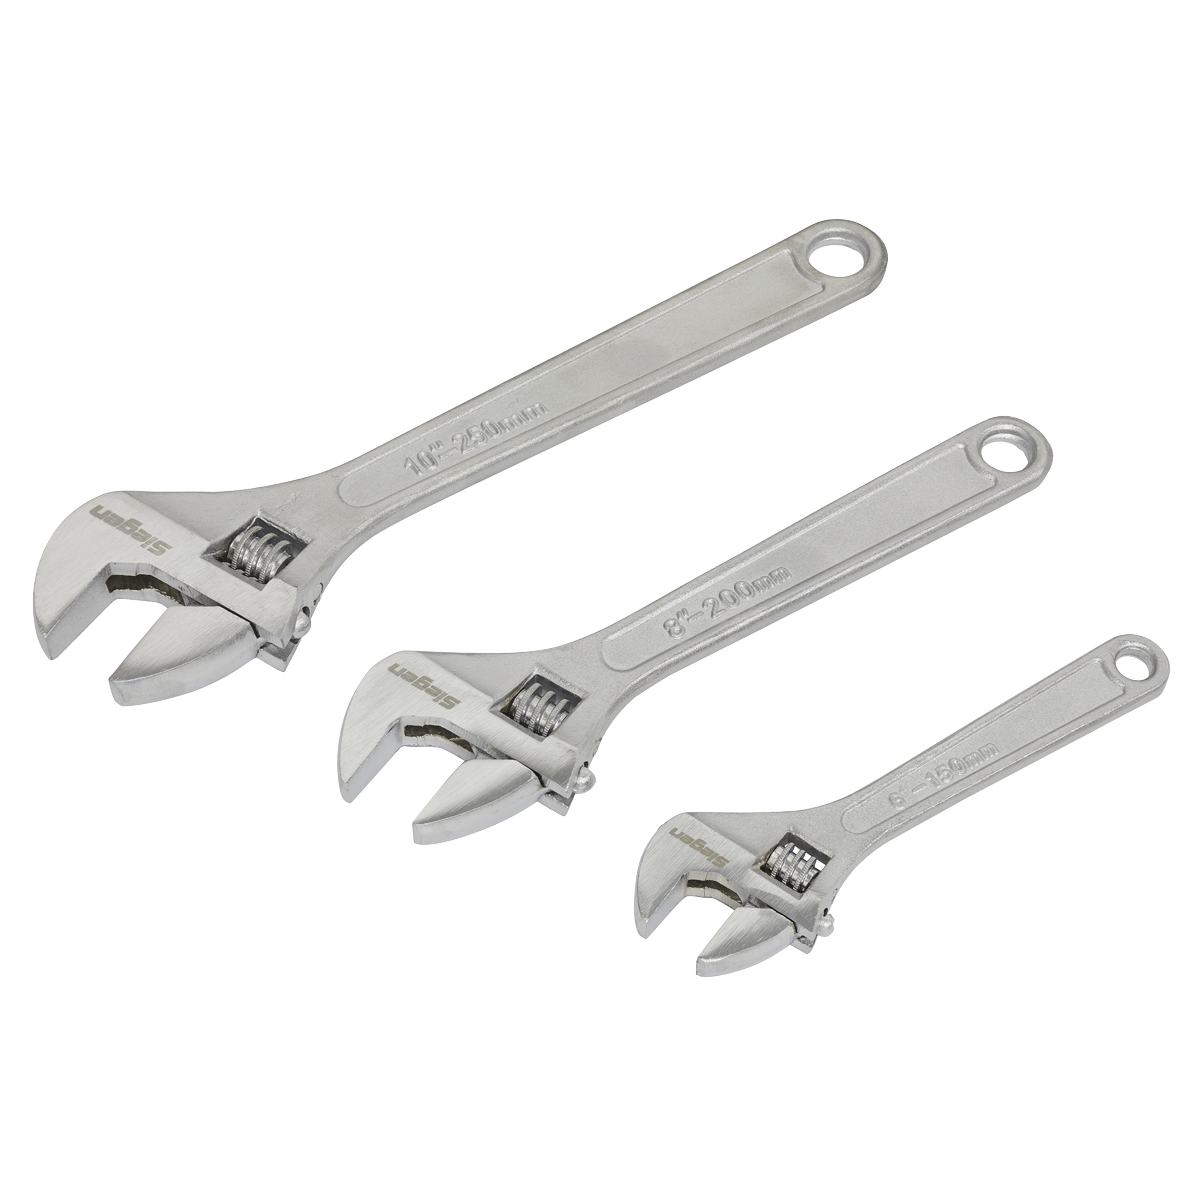 S0448 - Adjustable Wrench Set 3pc